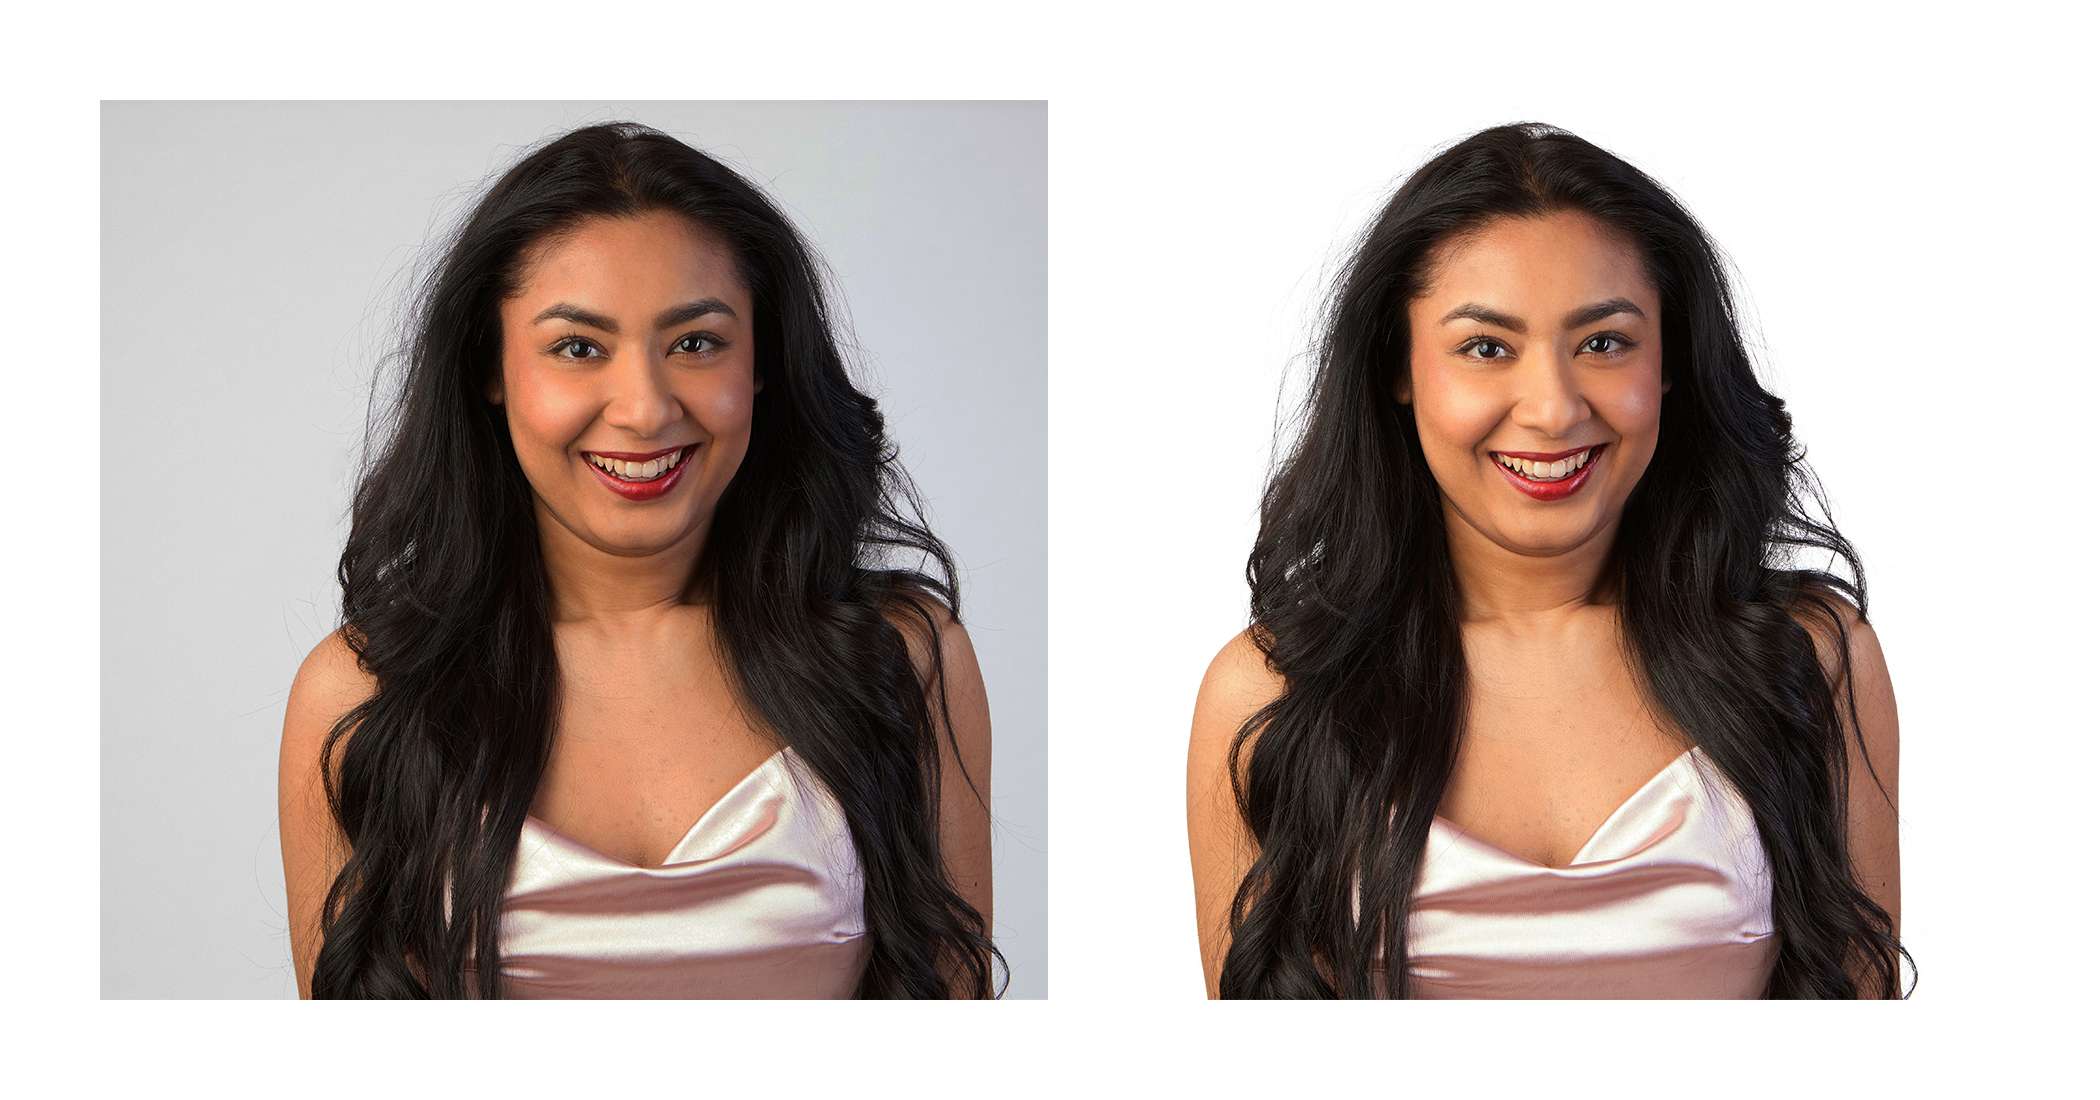 Image masking services, Photo Clipping Path BD, professional image editing, fast turnaround times, affordable pricing, quality assurance, experienced editors, remove backgrounds, isolate objects, transparent images